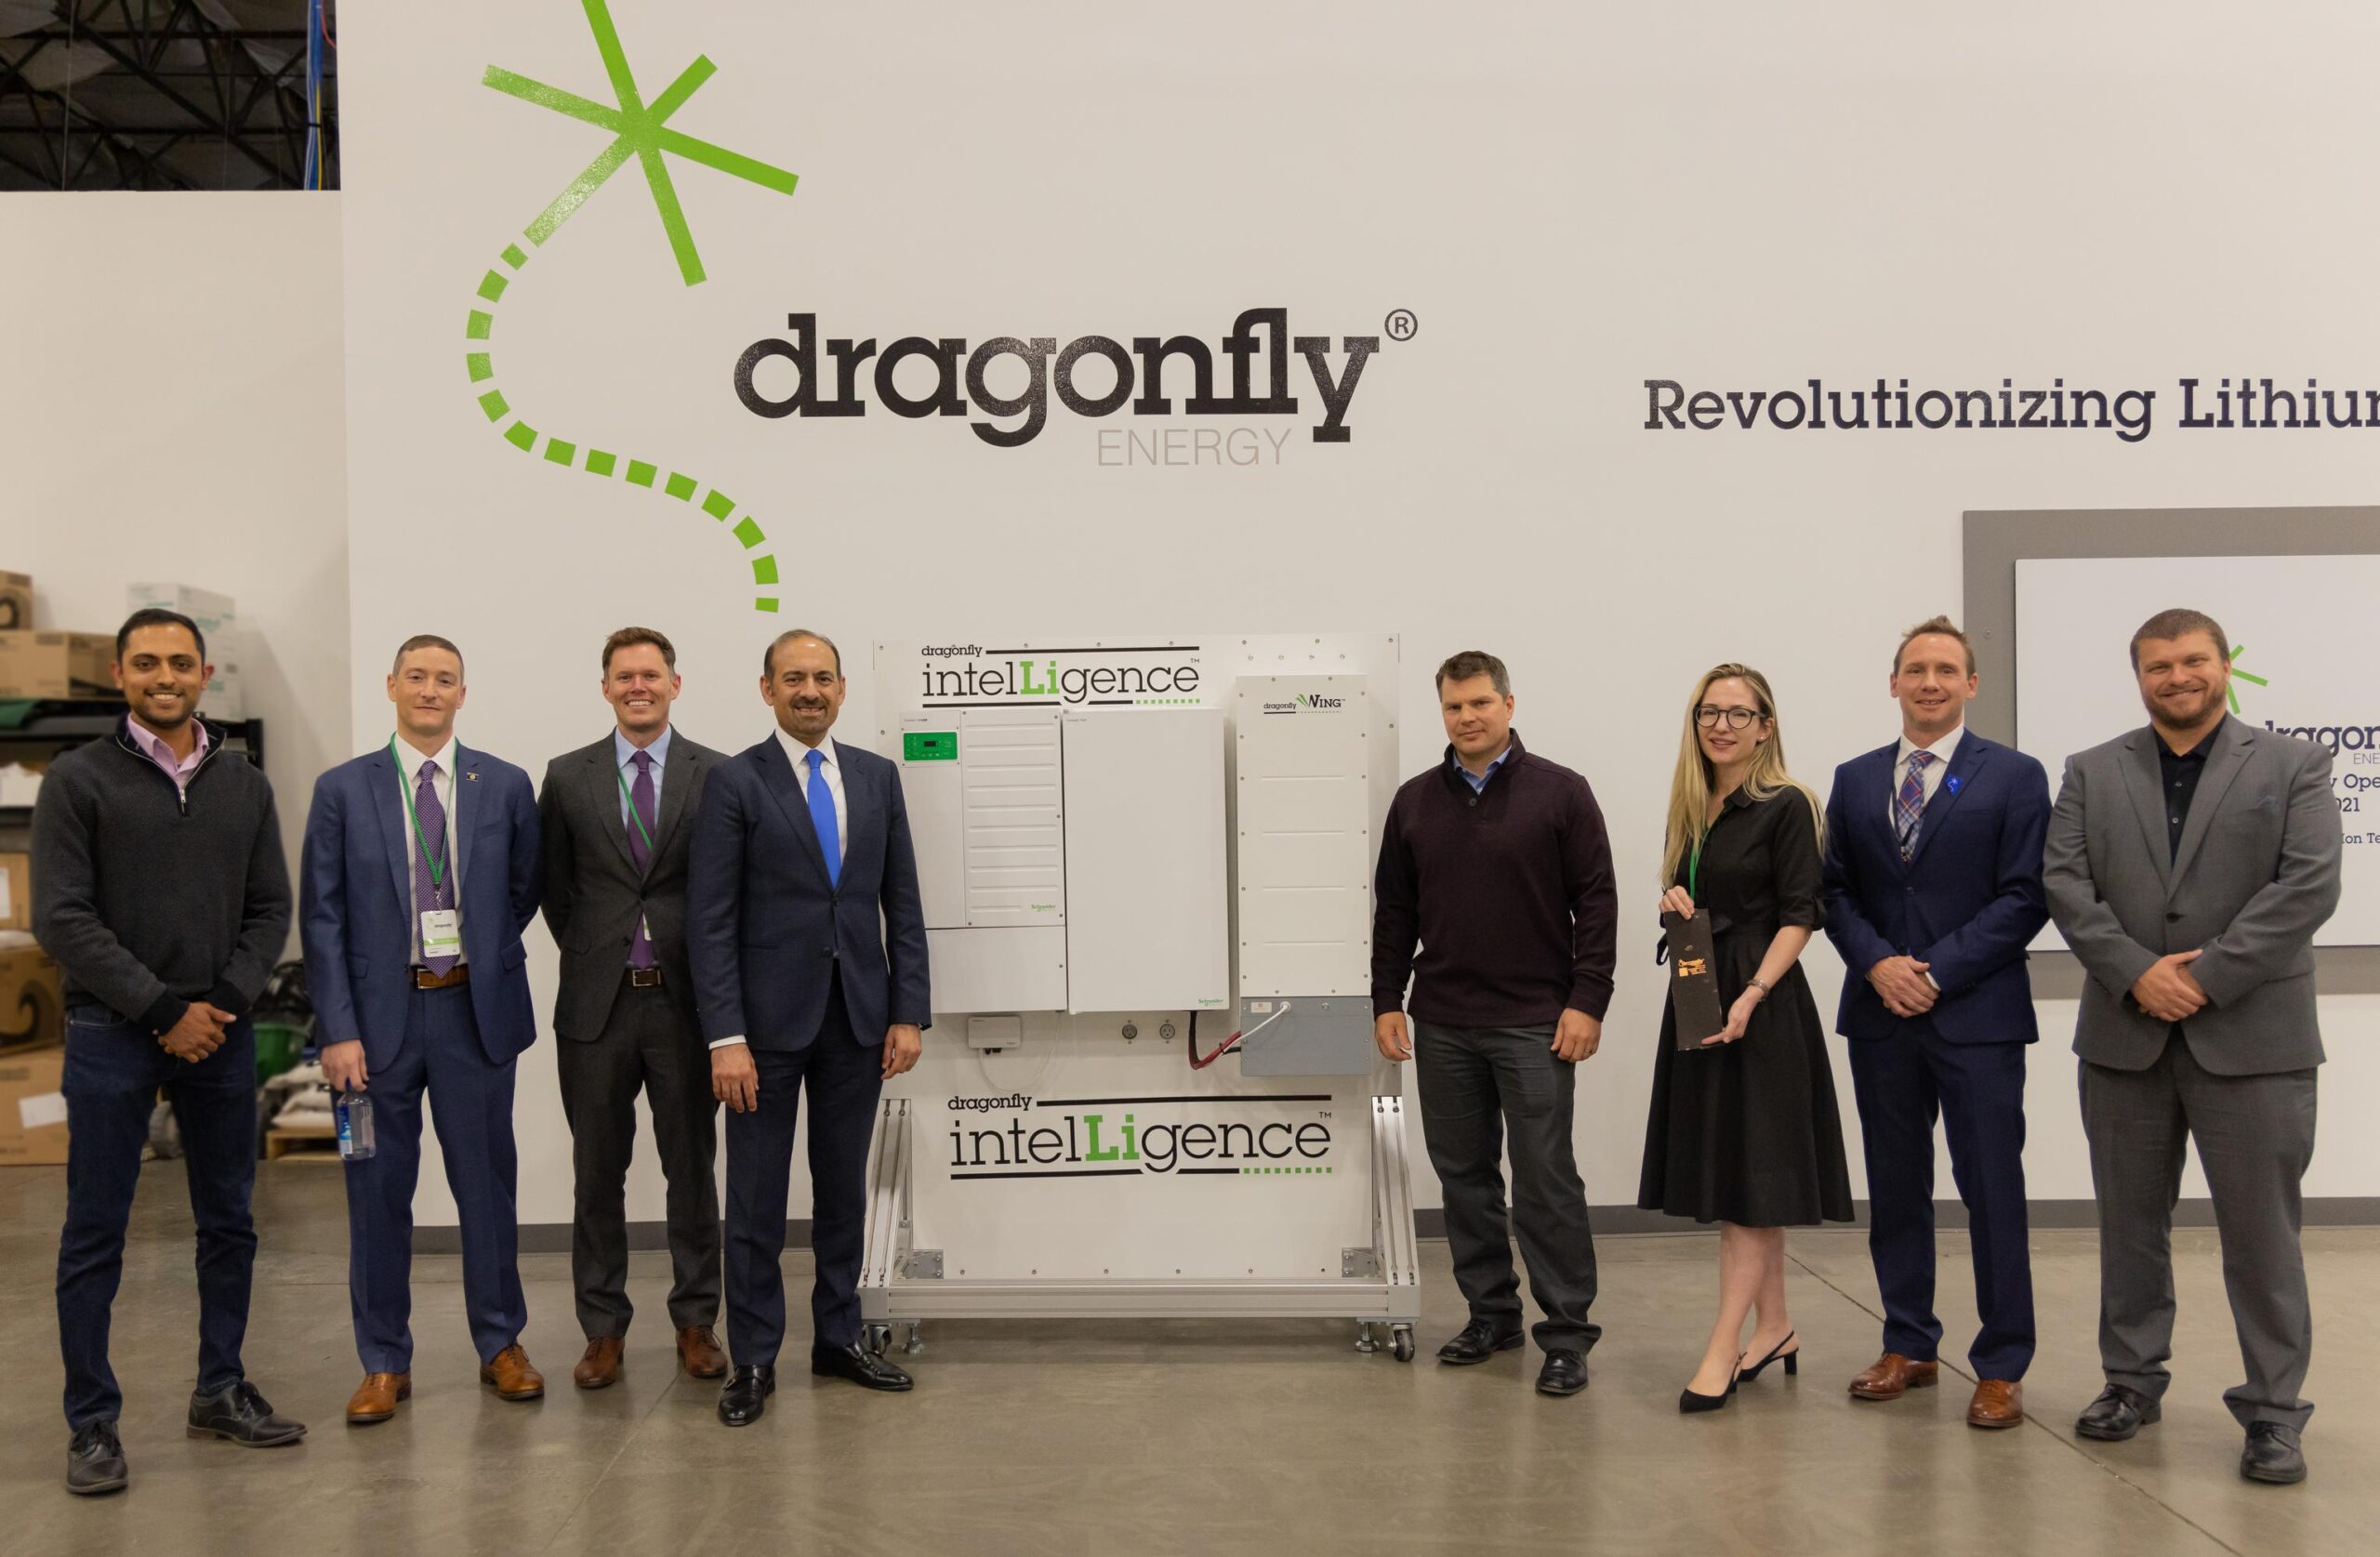 Dragonfly Energy's leadership team posed witha Dragonfly IntelLigence product